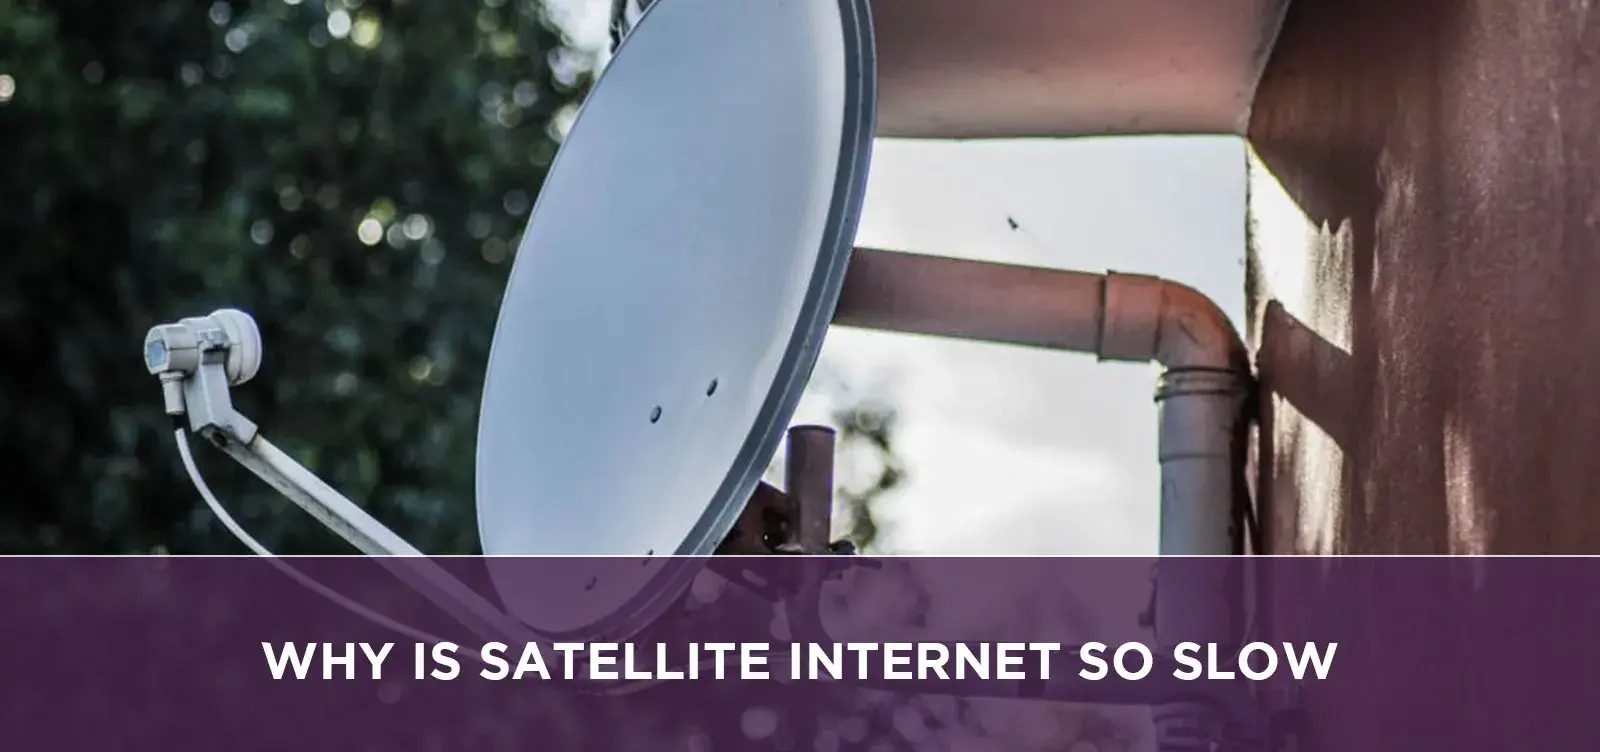 Why Is Satellite Internet So Slow?